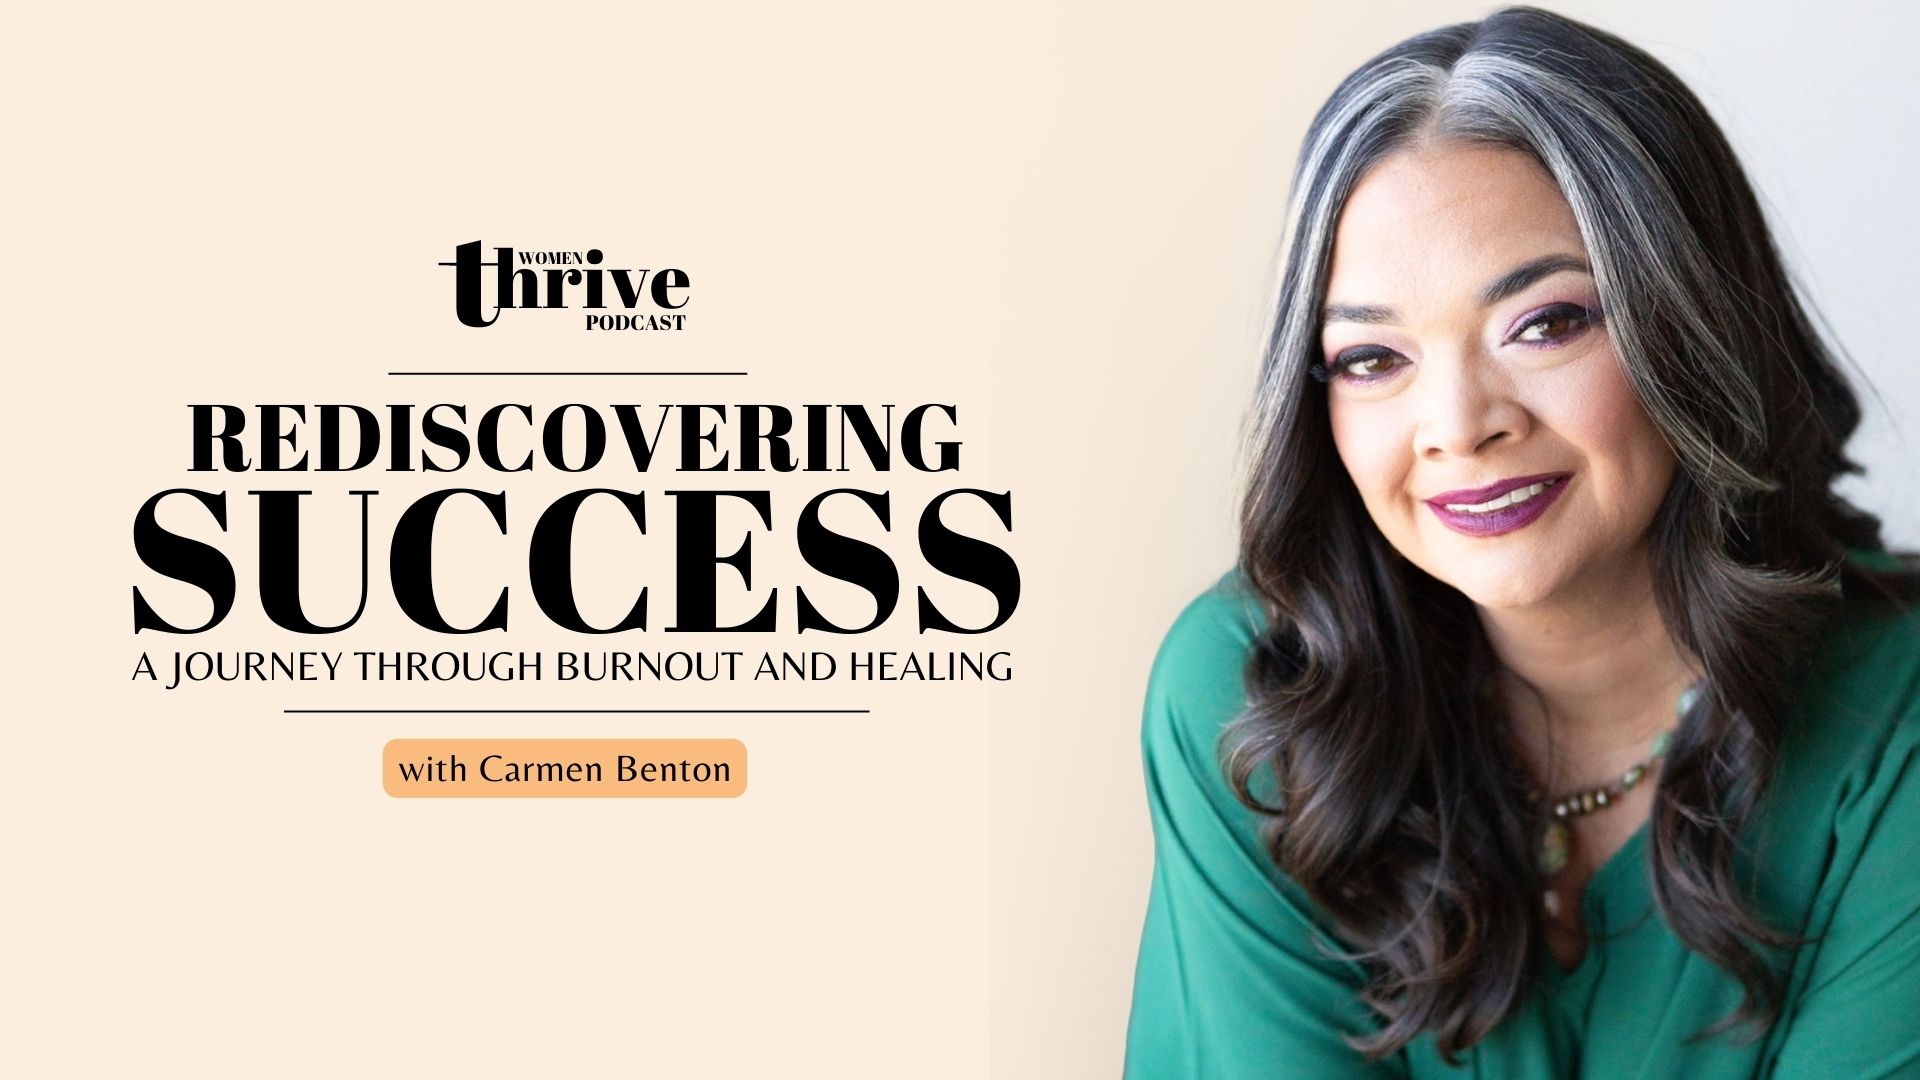 Rediscovering Success: A Journey Through Burnout and Healing with Carmen Benton